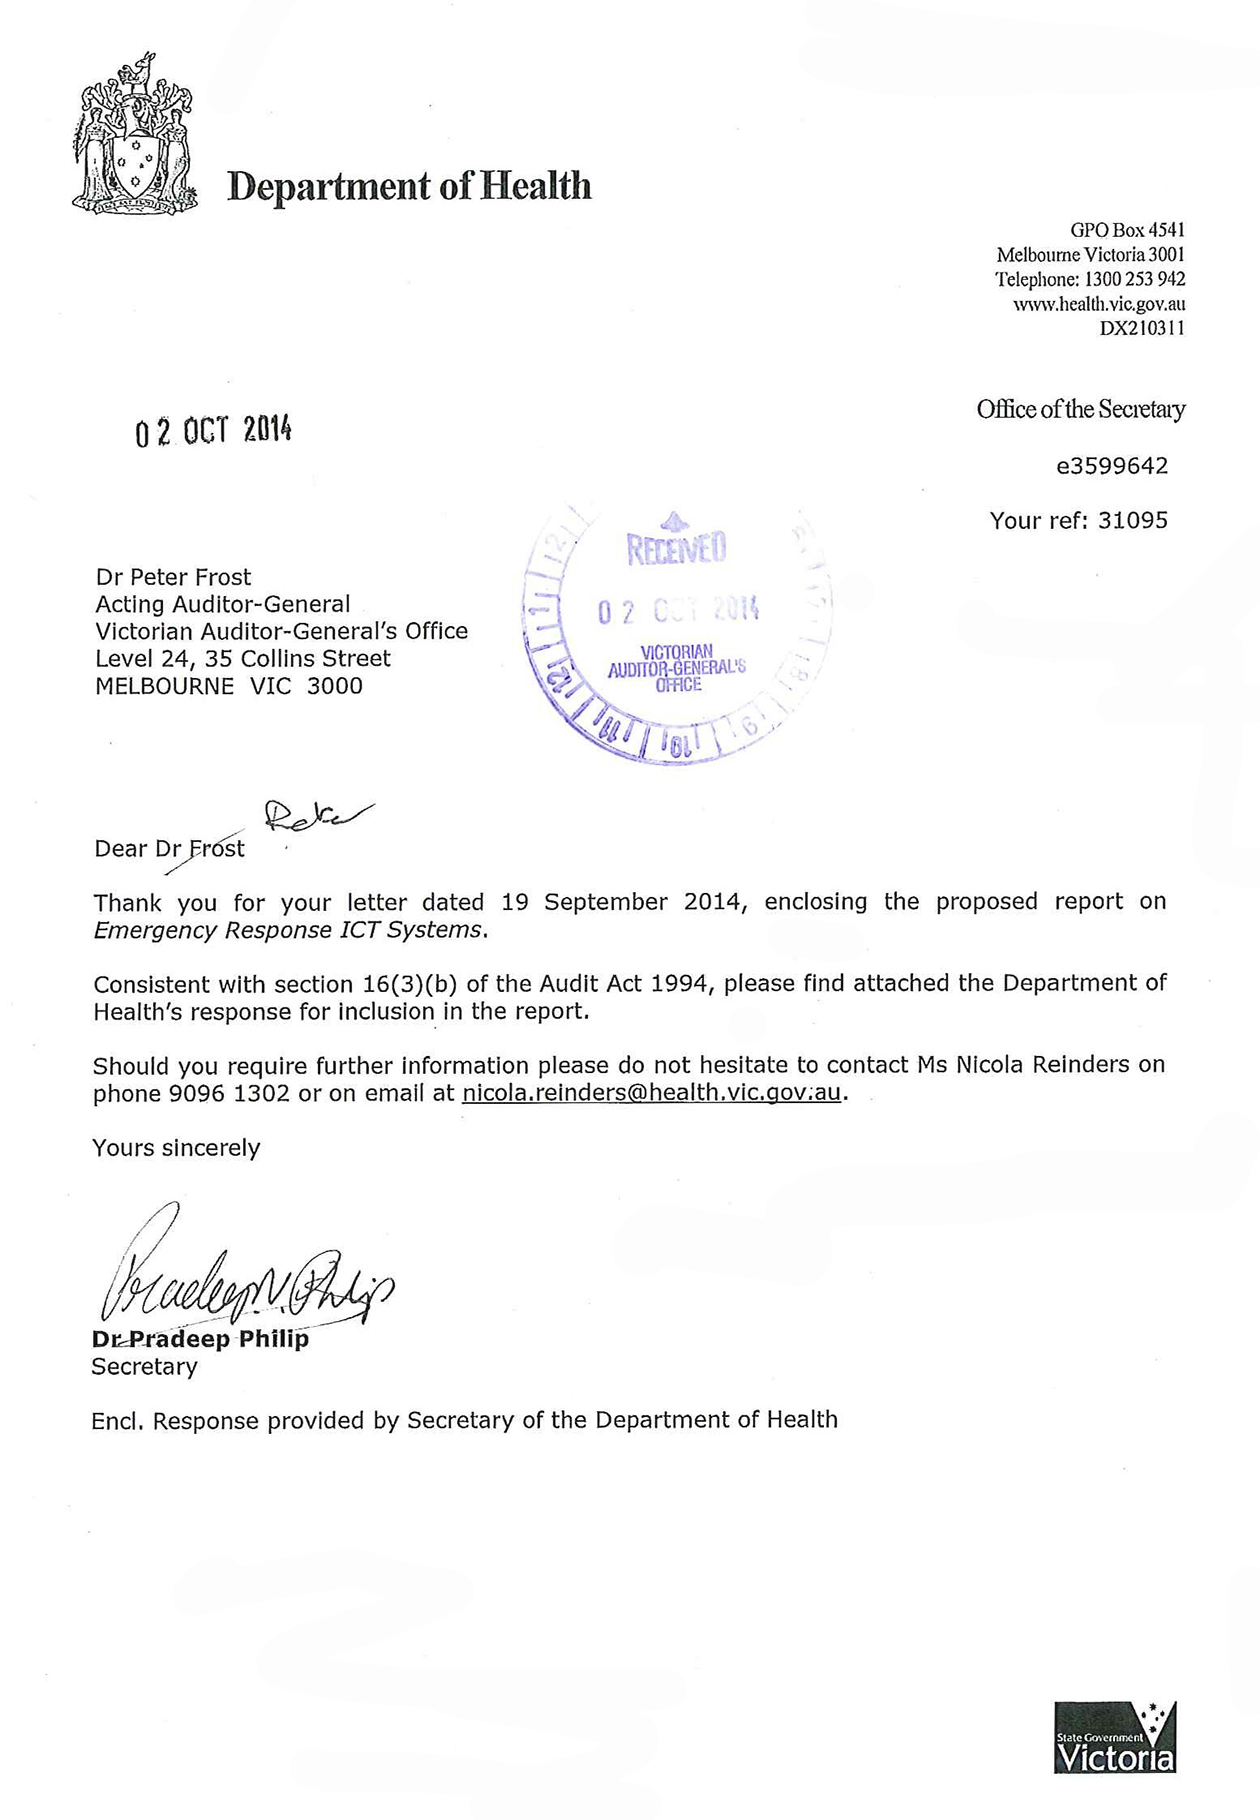 Image shows response provided by the Secretary, Department of Health